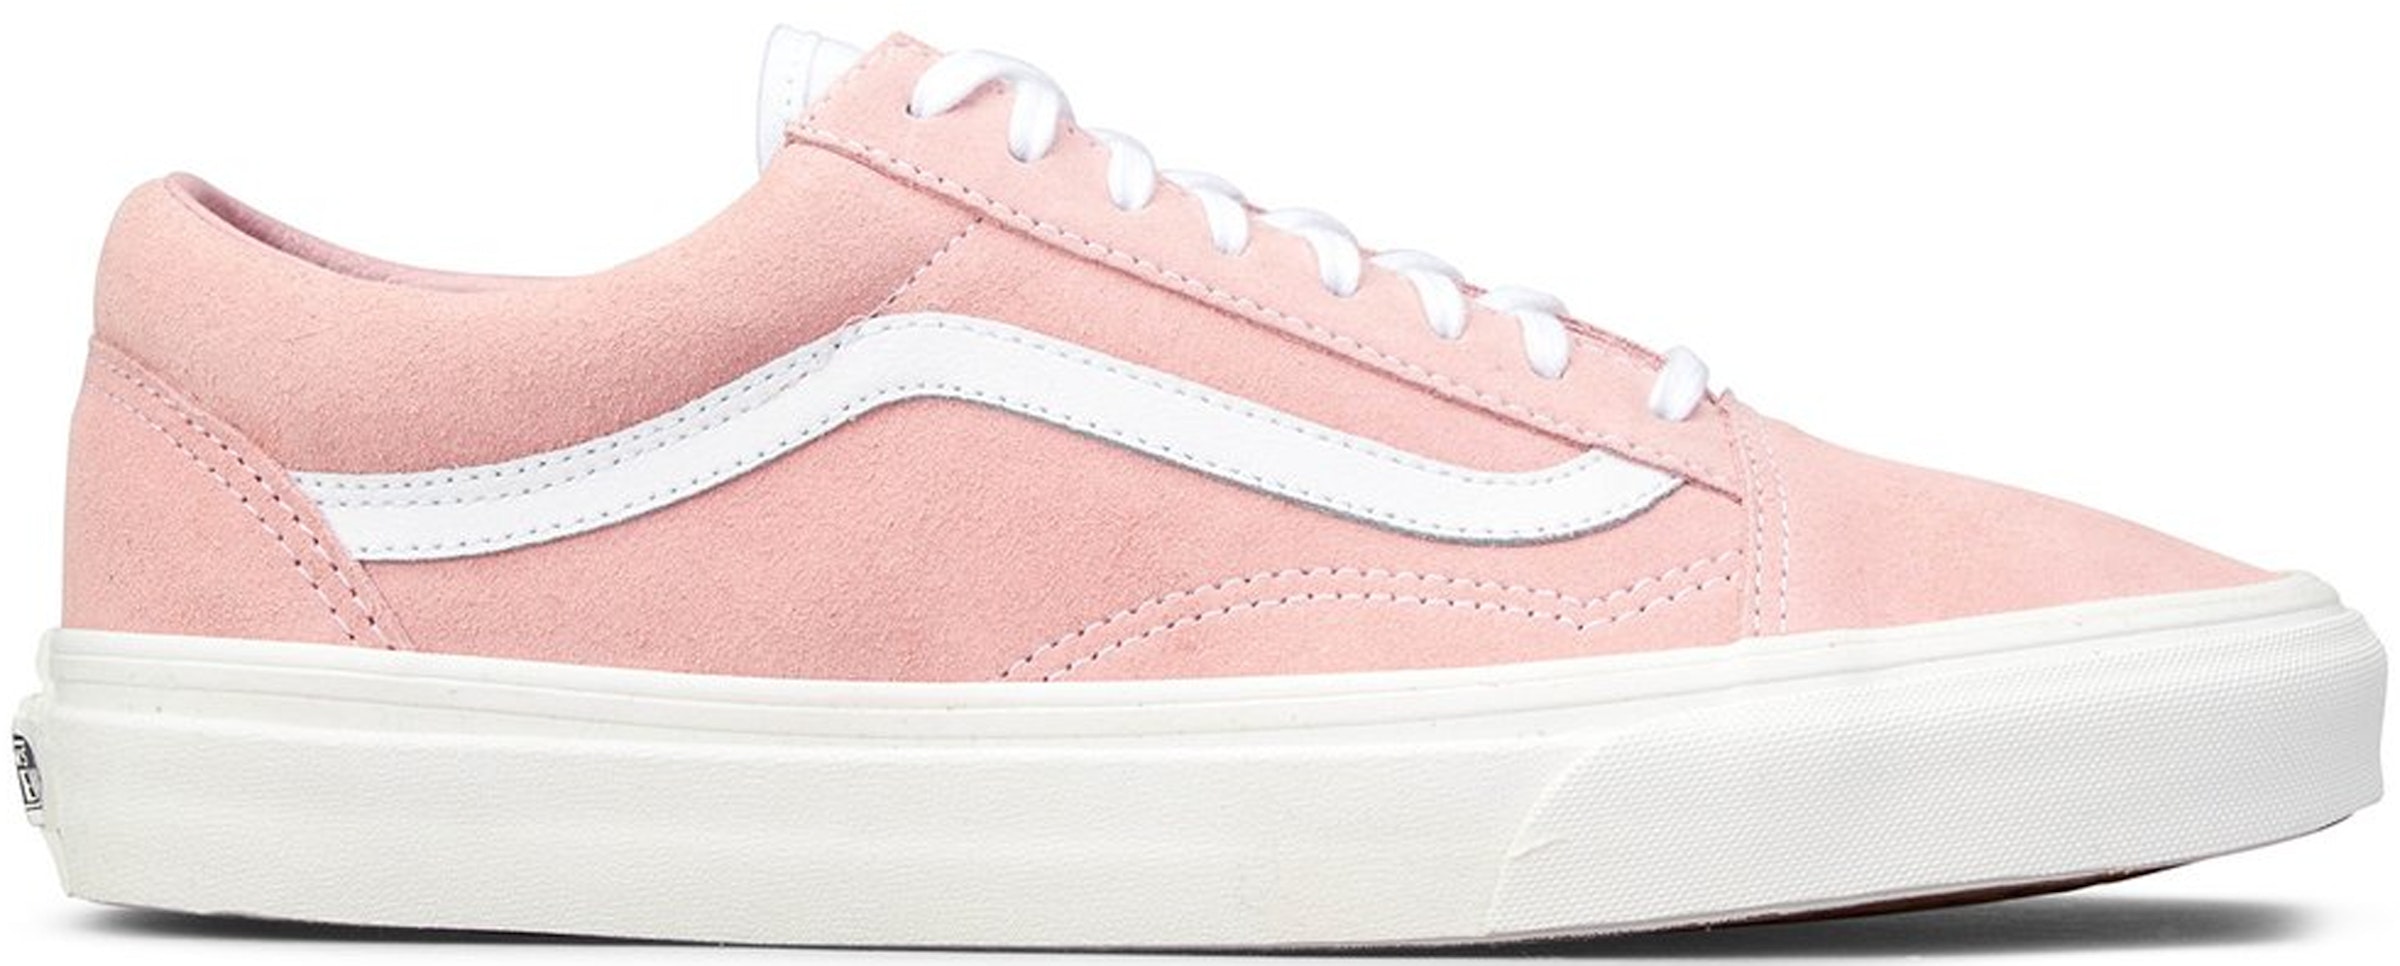 Old Skool Sport Blossom (Women's) - VN0A38G1OI3 - US